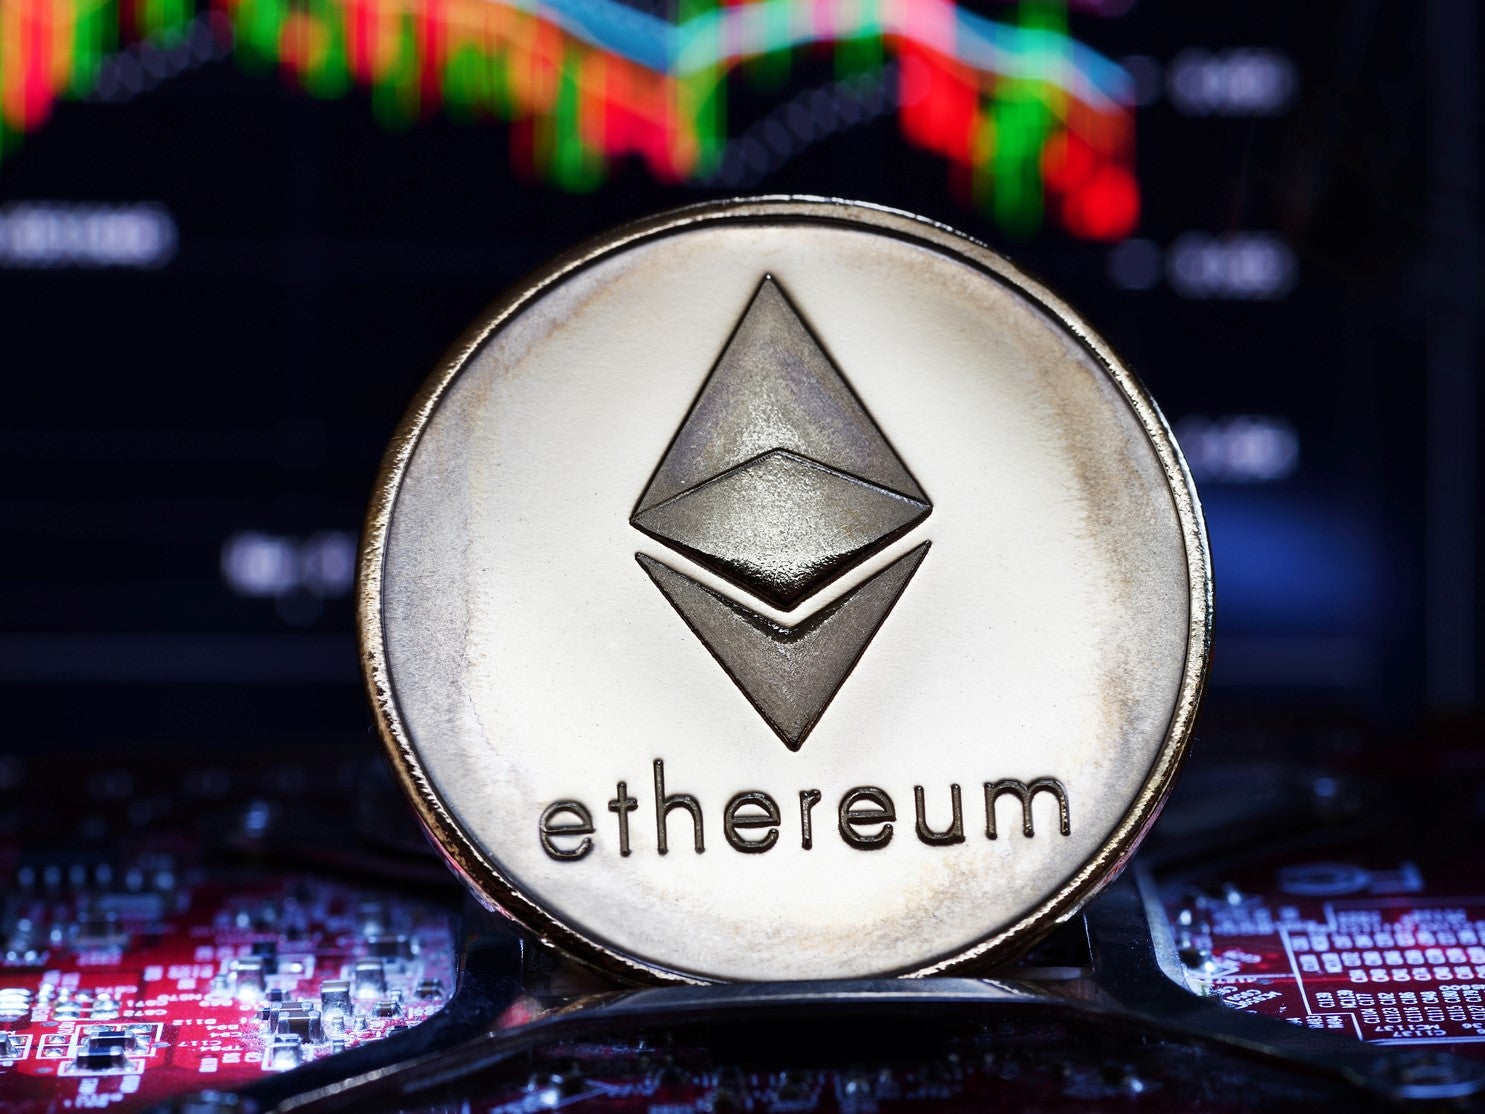 Ethereum has risen in price by more than 1,000 per cent over the last year